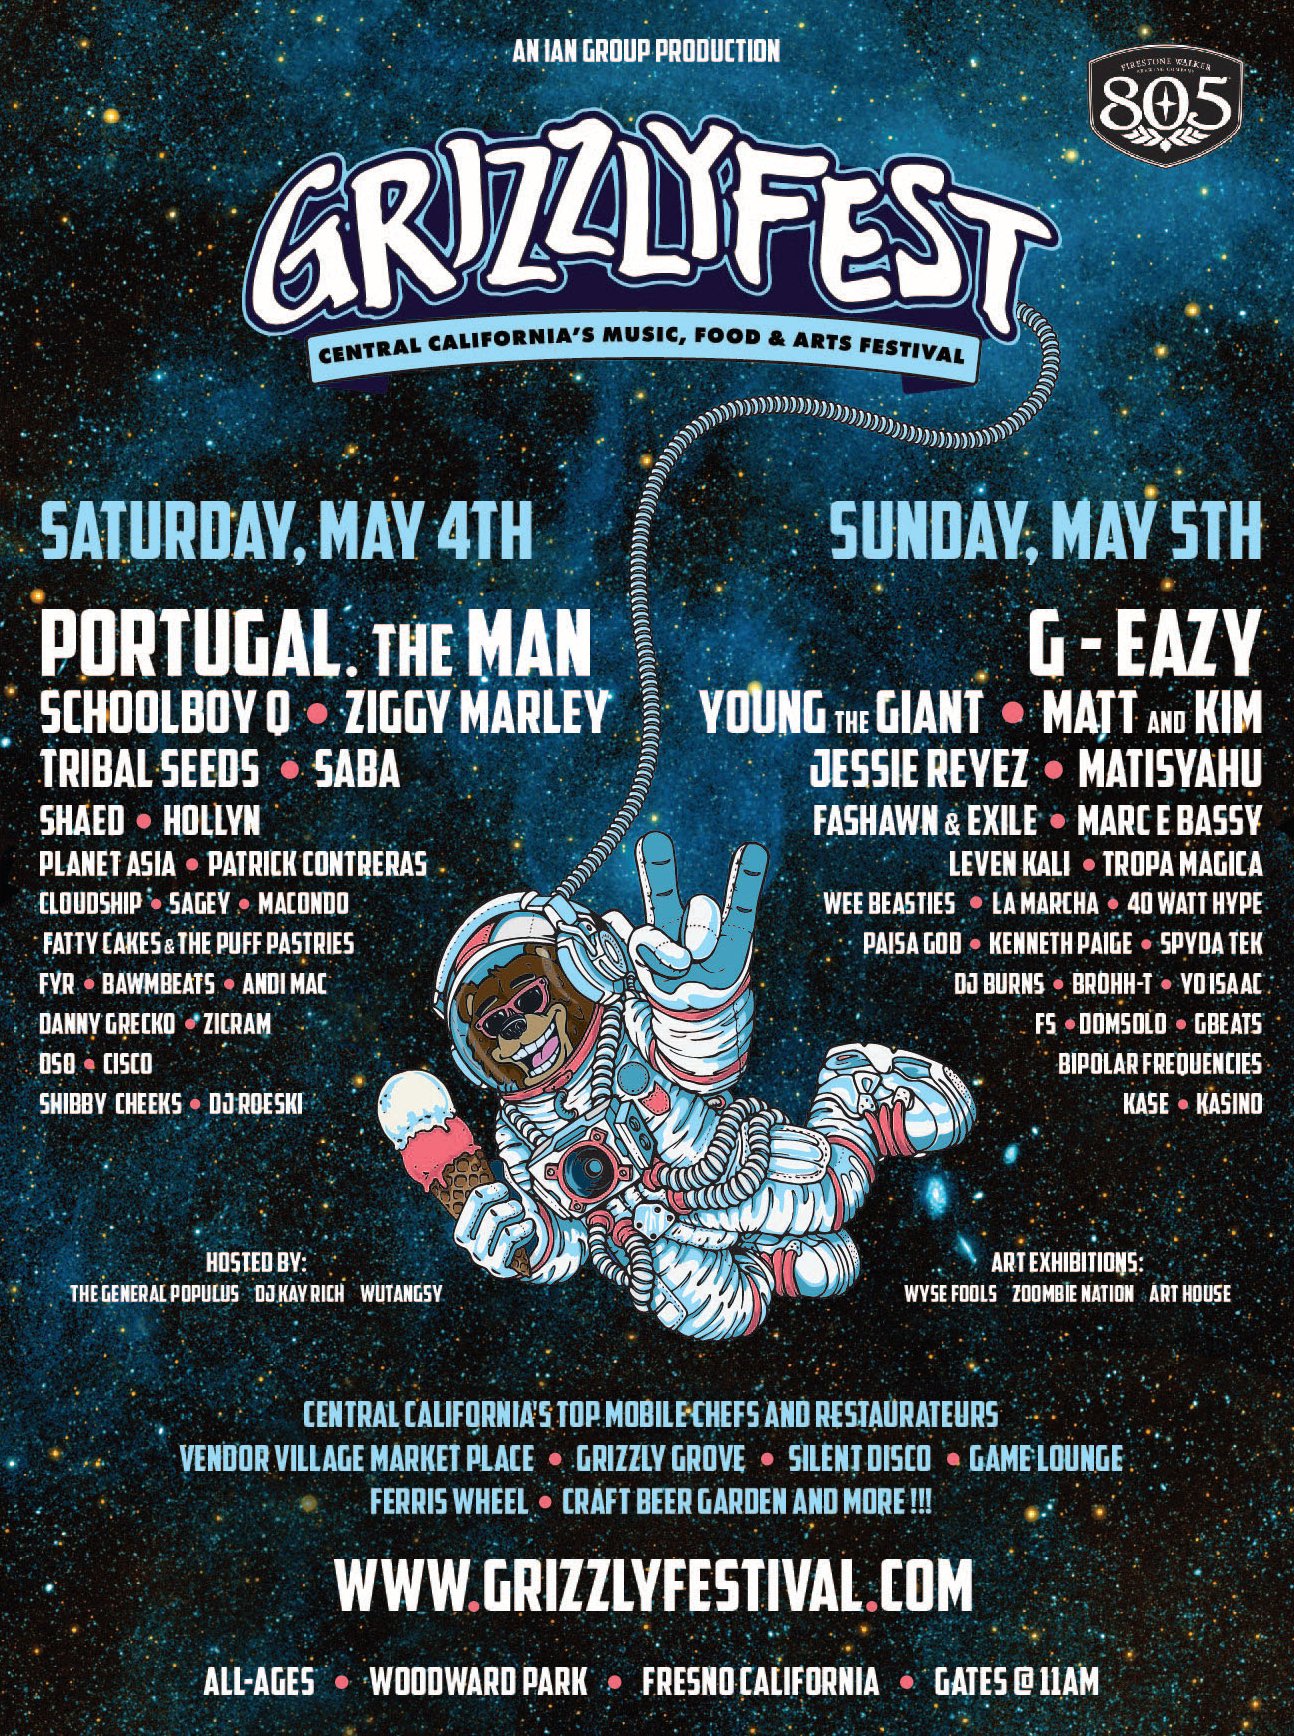 Grizzly+Fest+2019+-+Final+Poster_805.jpg